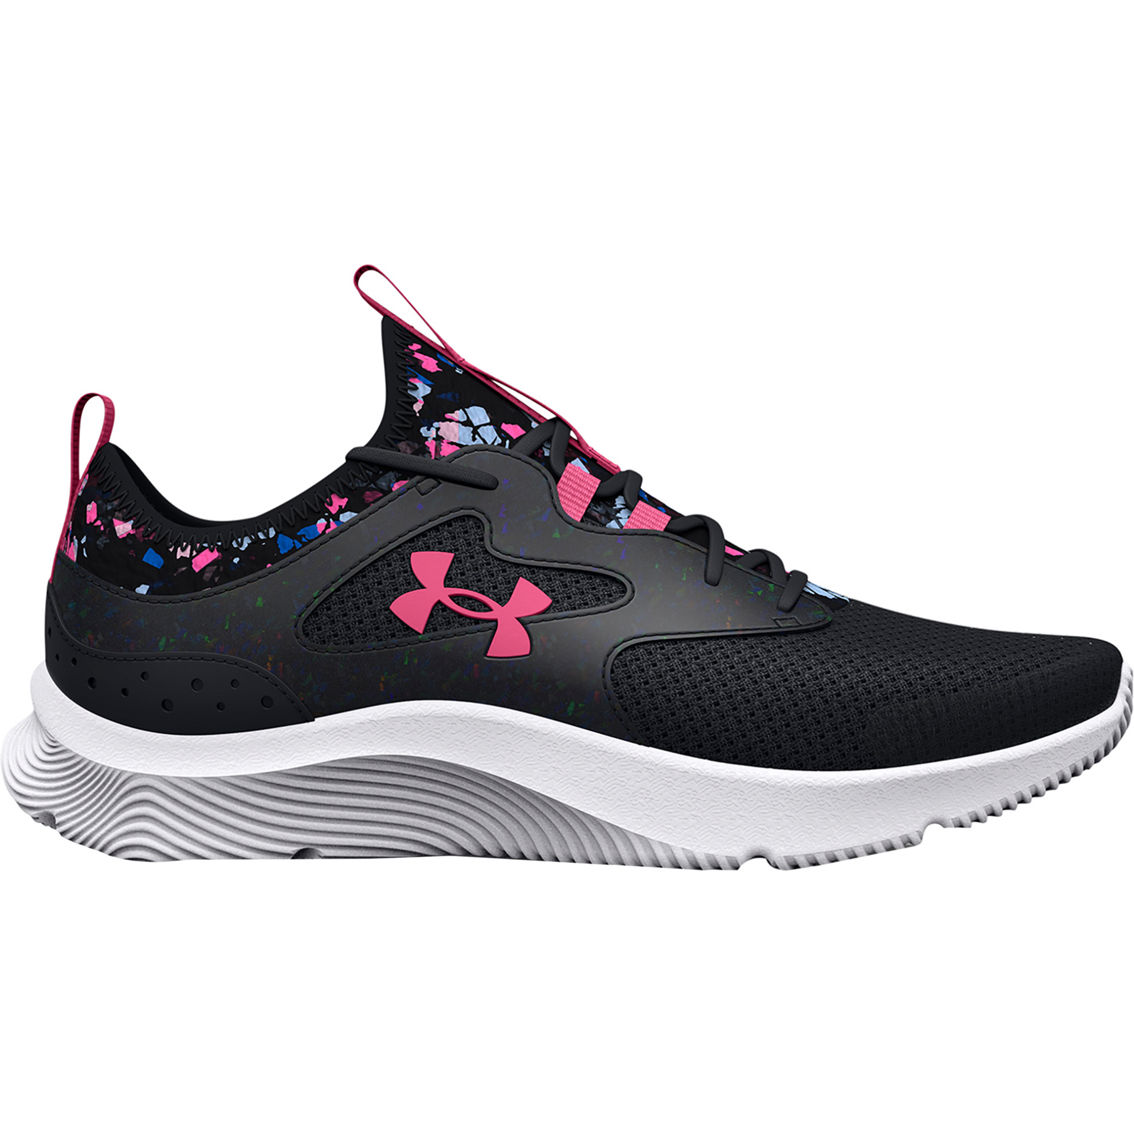 Under Armour Grade School Girls Infinity 2.0 Printed Running Shoes - Image 2 of 5